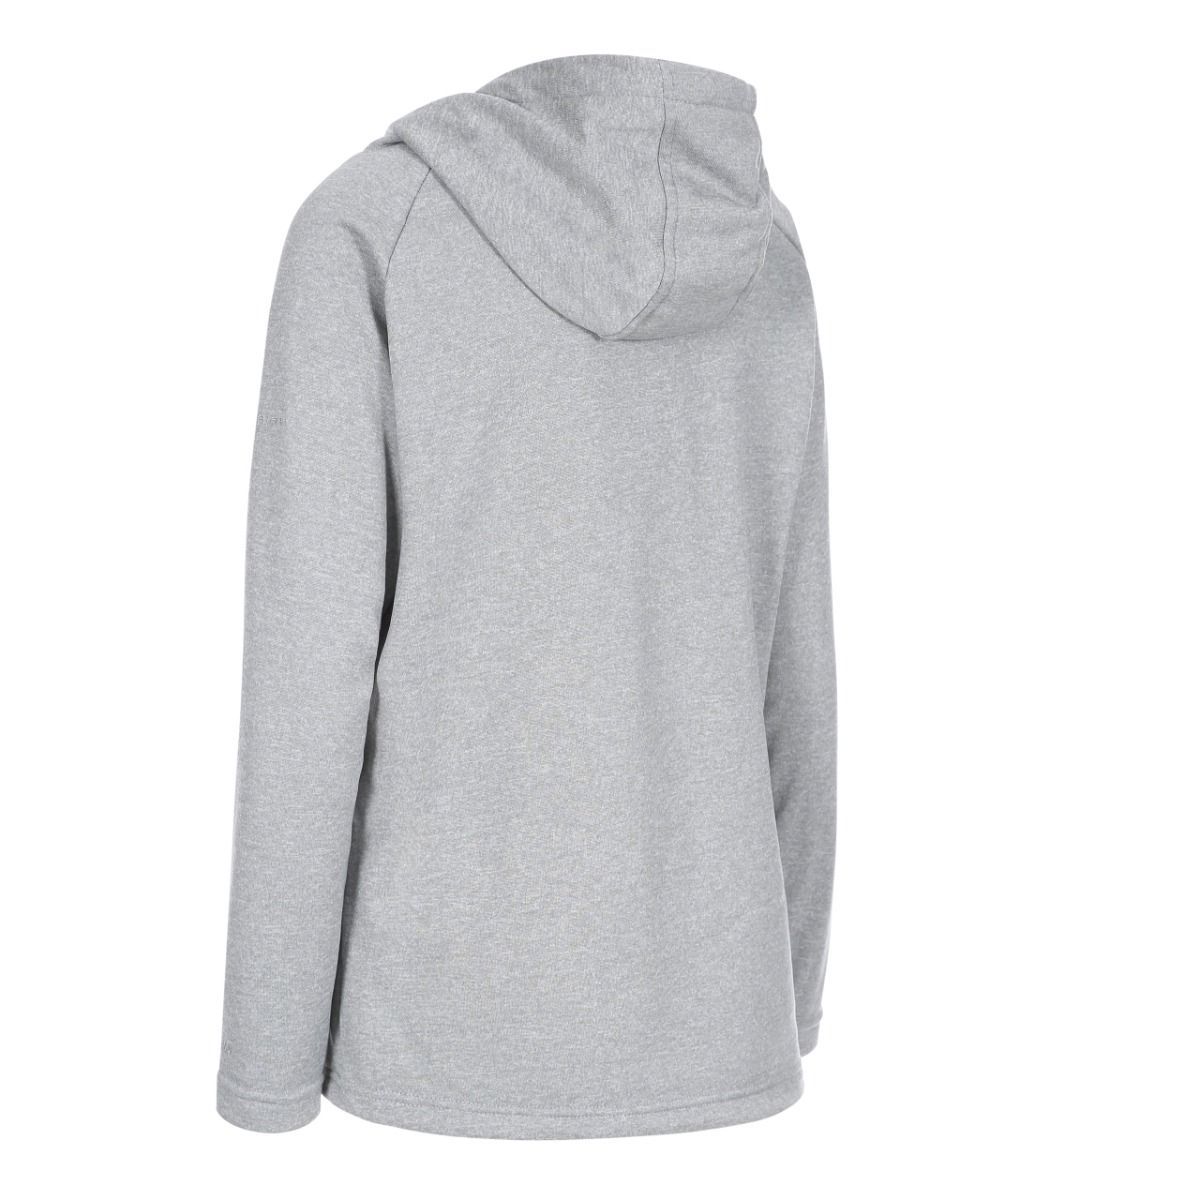 Melange fleece with brushed back. Grown on hood with mesh lining. 2 concealed zip pockets. Tie adjusters. Airtrap. 200gsm. 100% polyester. Trespass Womens Chest Sizing (approx): XS/8 - 32in/81cm, S/10 - 34in/86cm, M/12 - 36in/91.4cm, L/14 - 38in/96.5cm, XL/16 - 40in/101.5cm, XXL/18 - 42in/106.5cm.